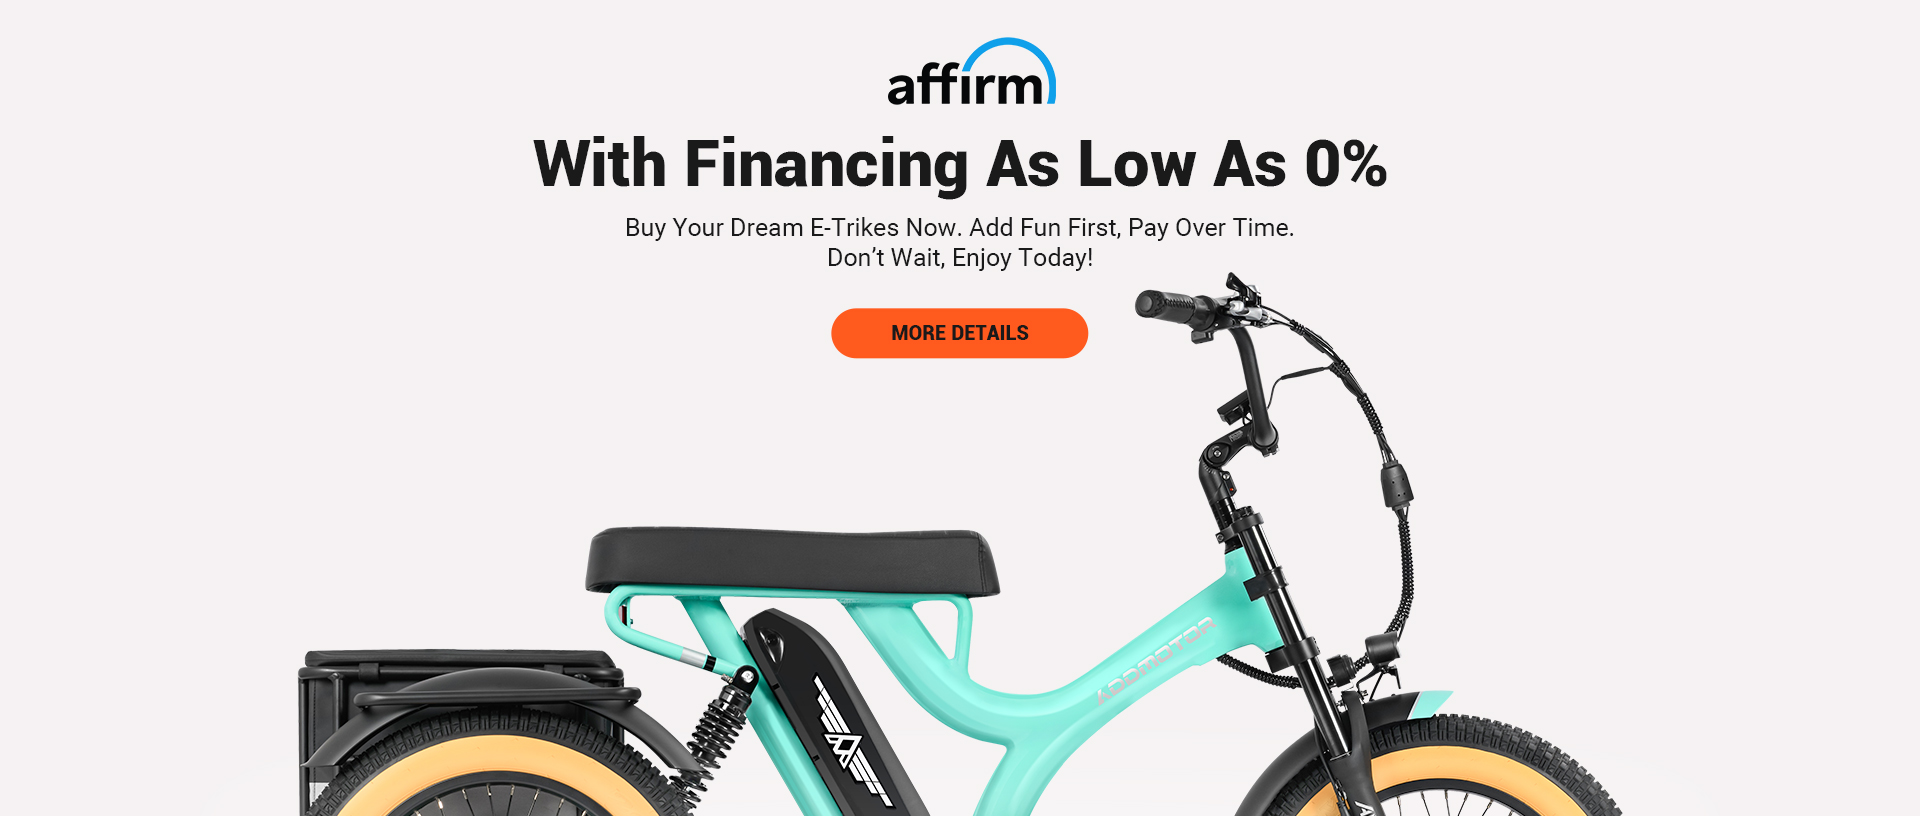 buy electric trikes with affirm